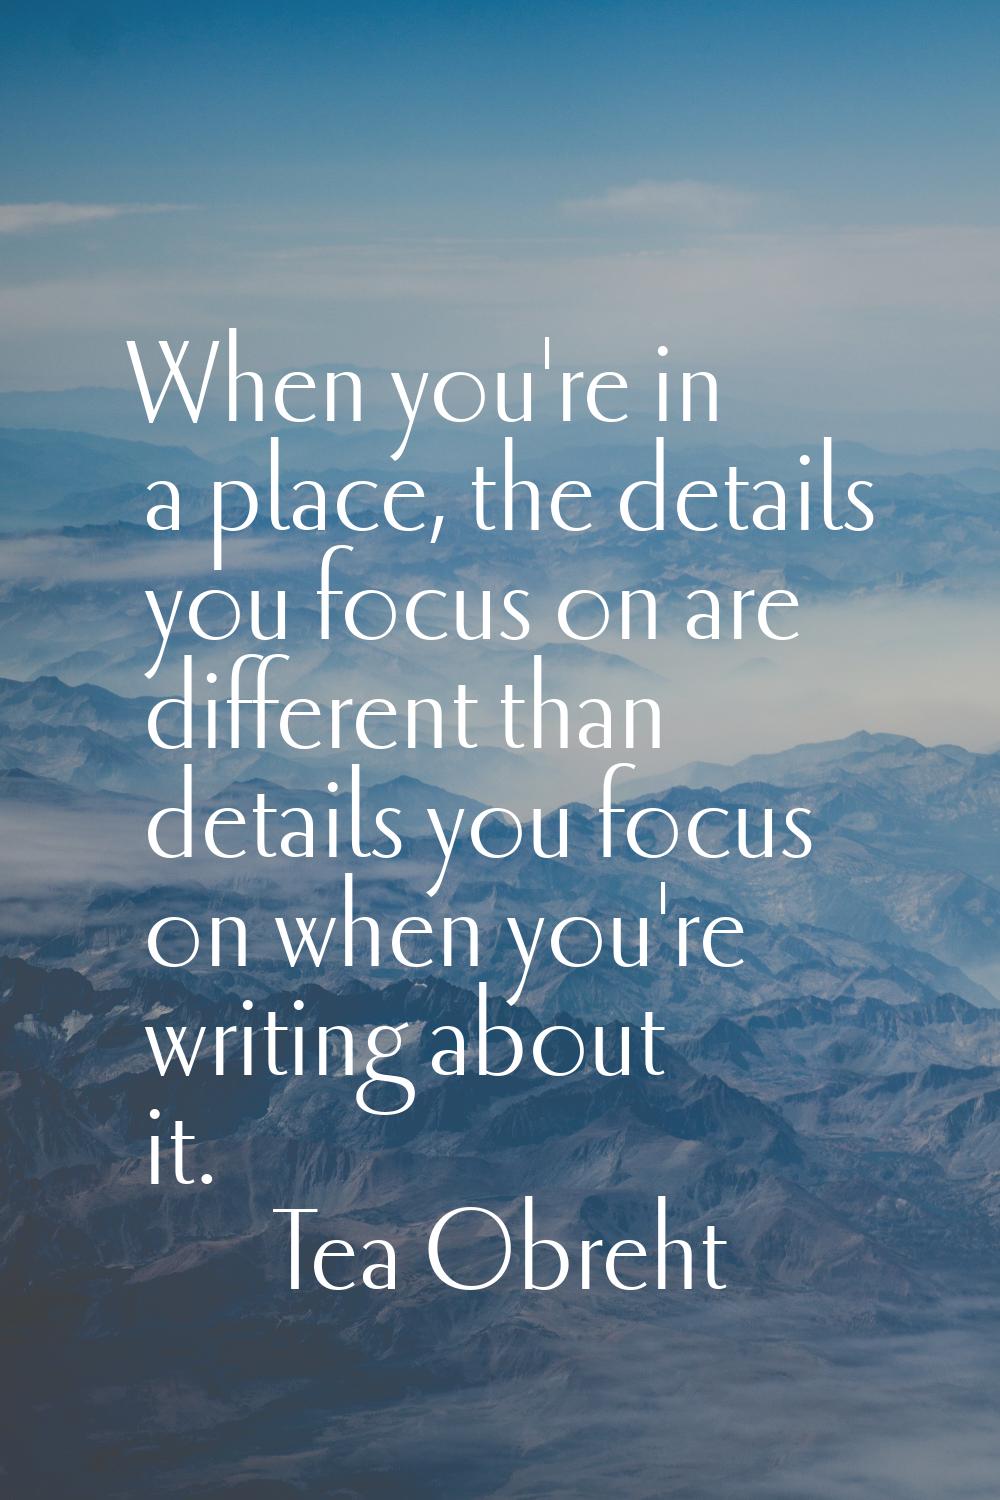 When you're in a place, the details you focus on are different than details you focus on when you'r